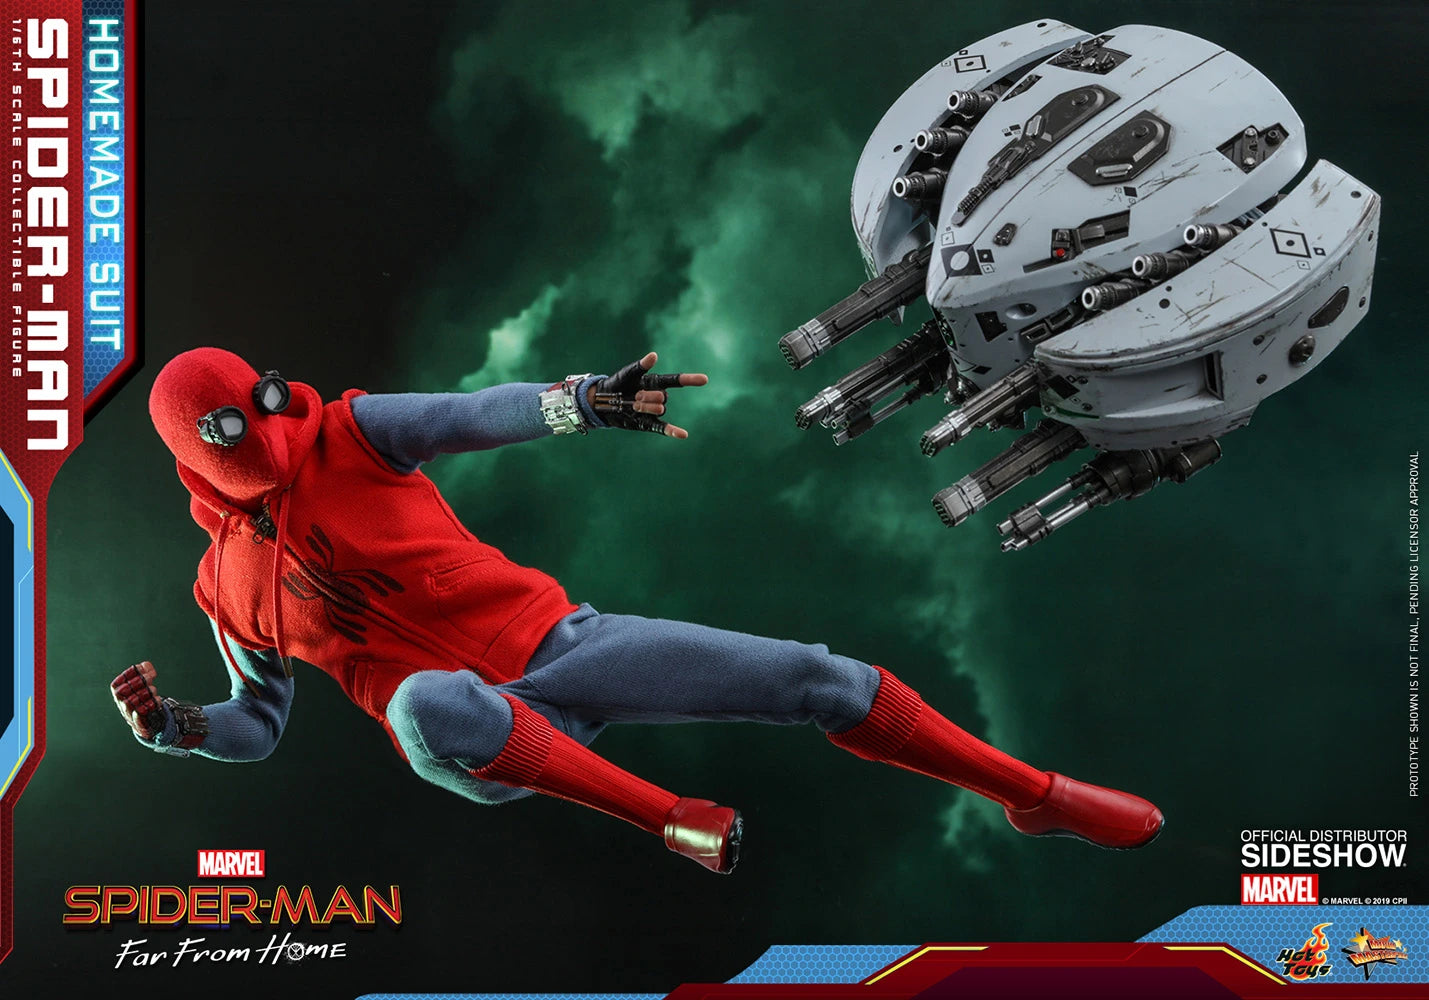 HOT TOYS MARVEL SPIDER-MAN FAR FROM HOME (HOMEMADE SUIT VERSION) COLLECTIBLE FIGURE 1/6TH SCALE - MMS552 - Anotoys Collectibles